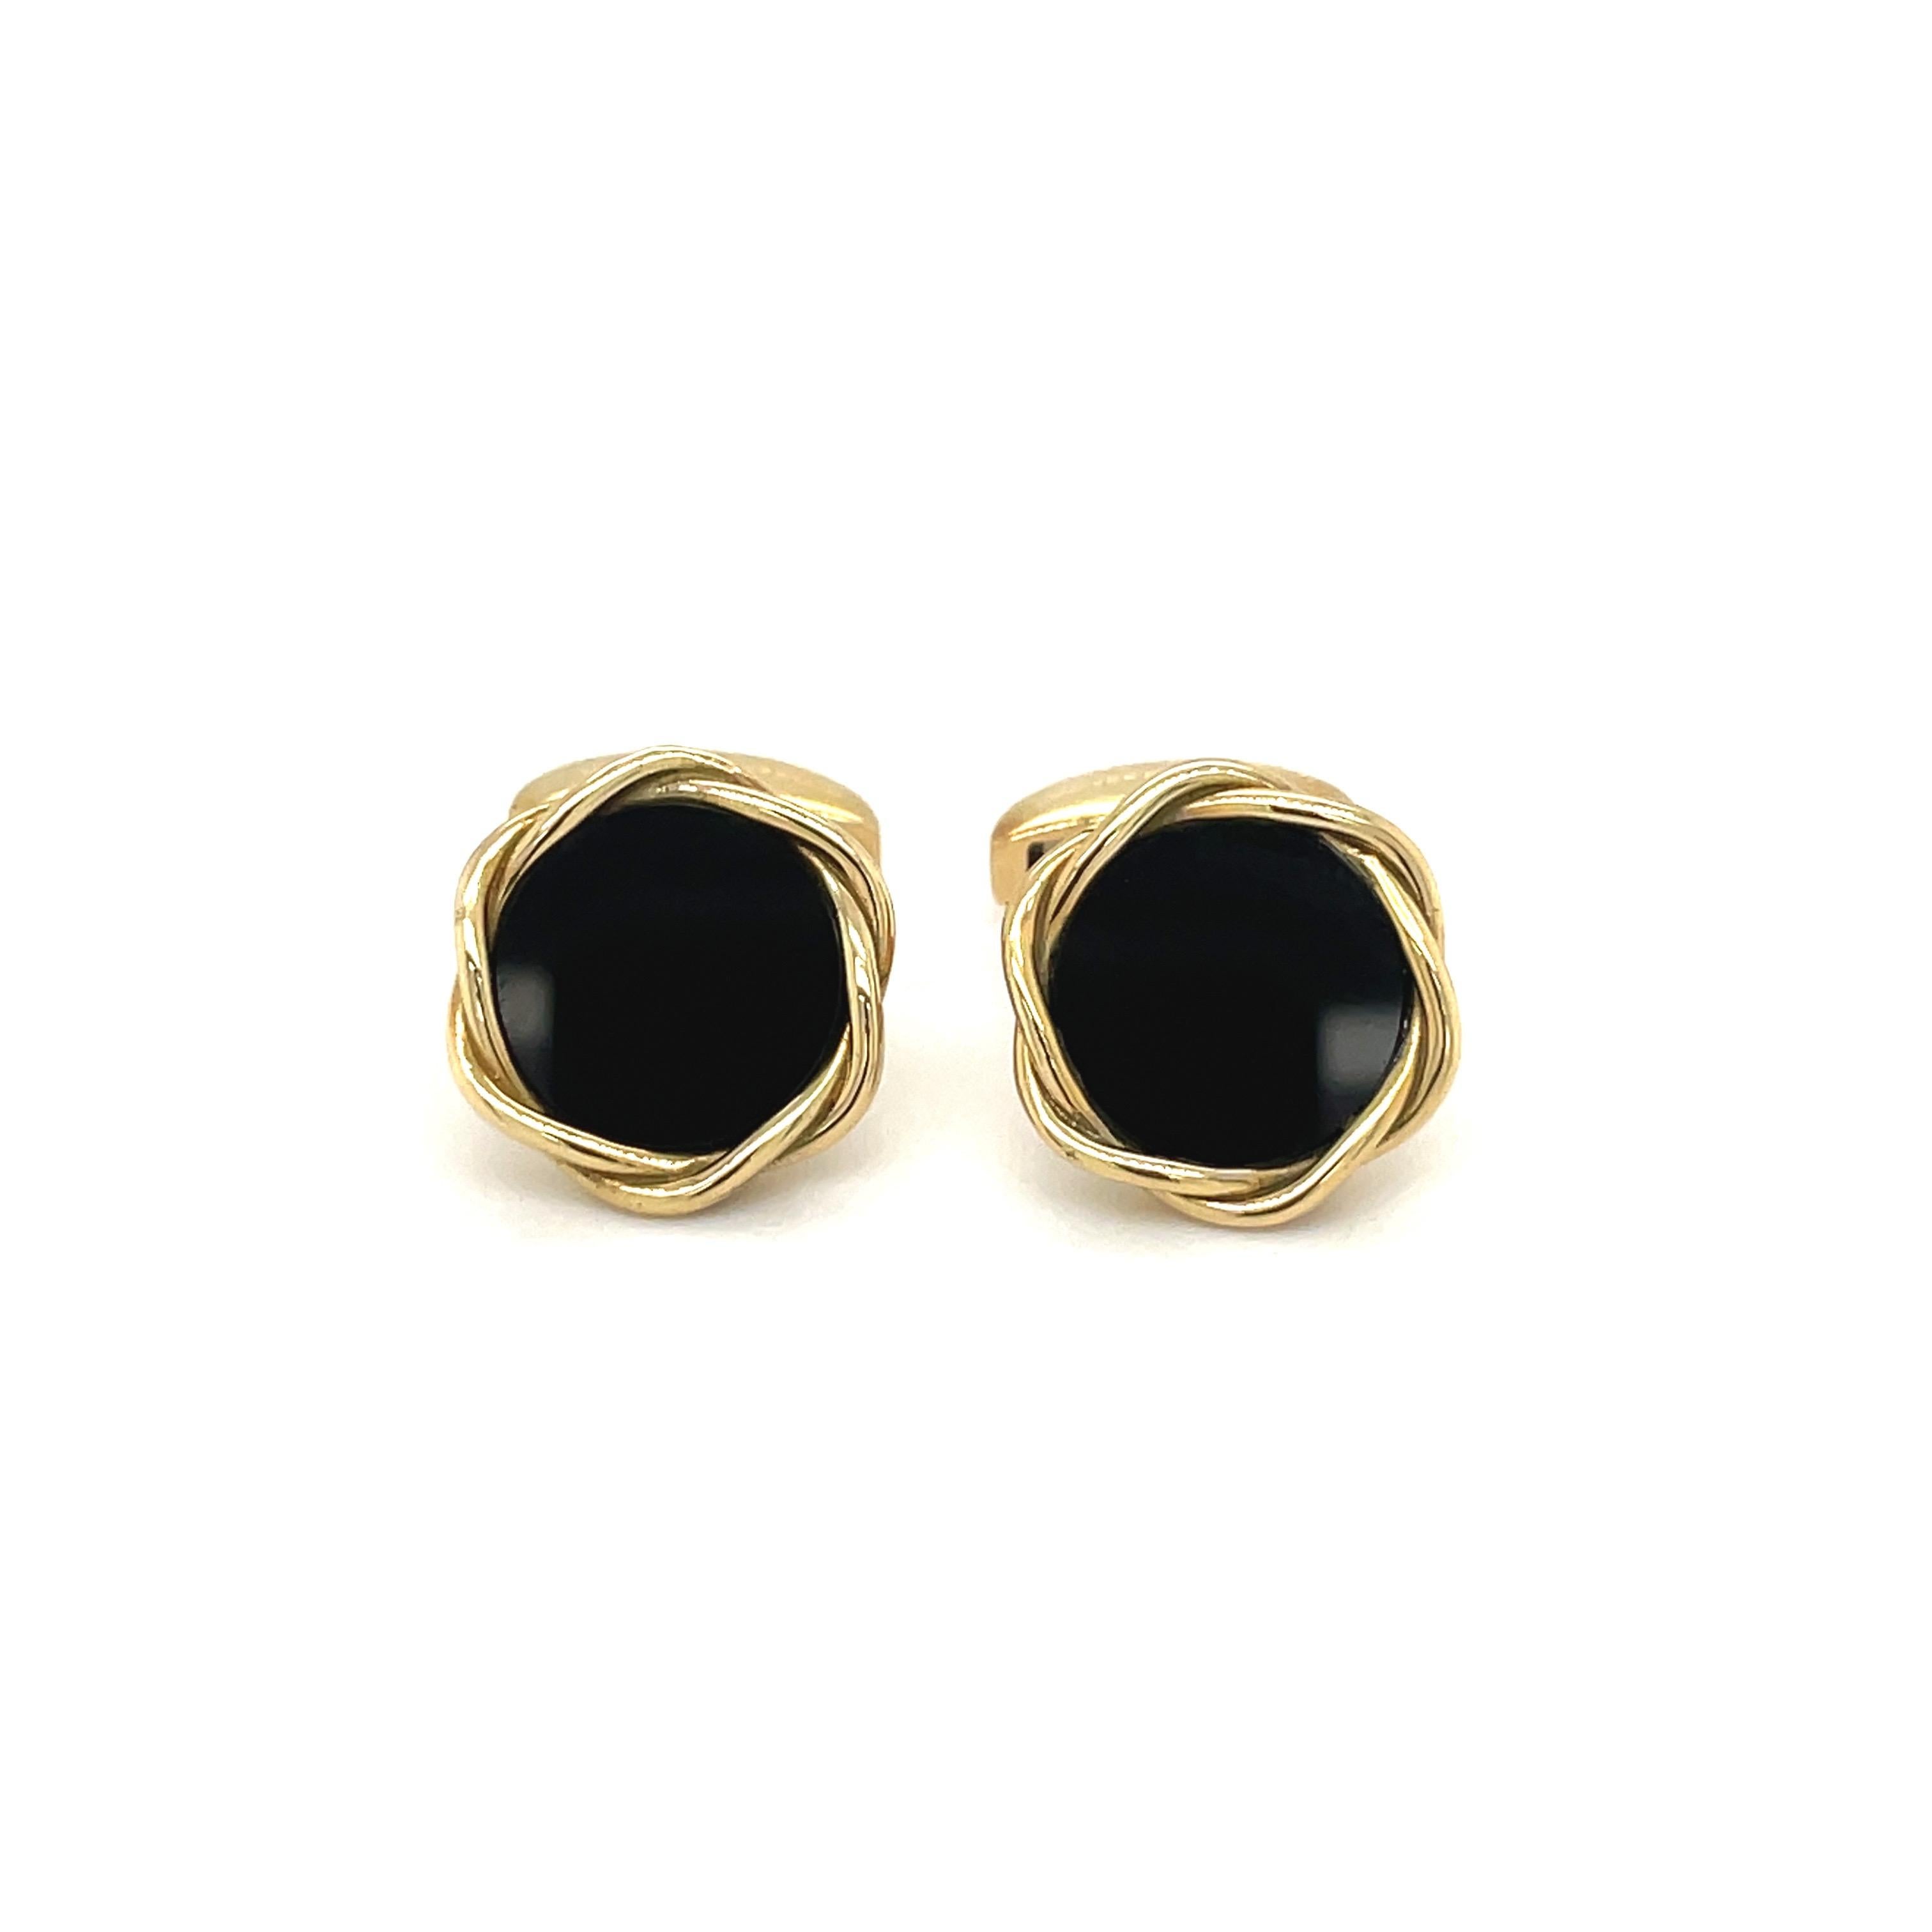 18 karat yellow gold round cuff links by Deakin & Francis, England's oldest family jewelers since 1786.
The round cuff links center black onyx with a gold twisted bezel. The bar back style cuff links are 15 mm diameter.
Stamped  England  D&F  750